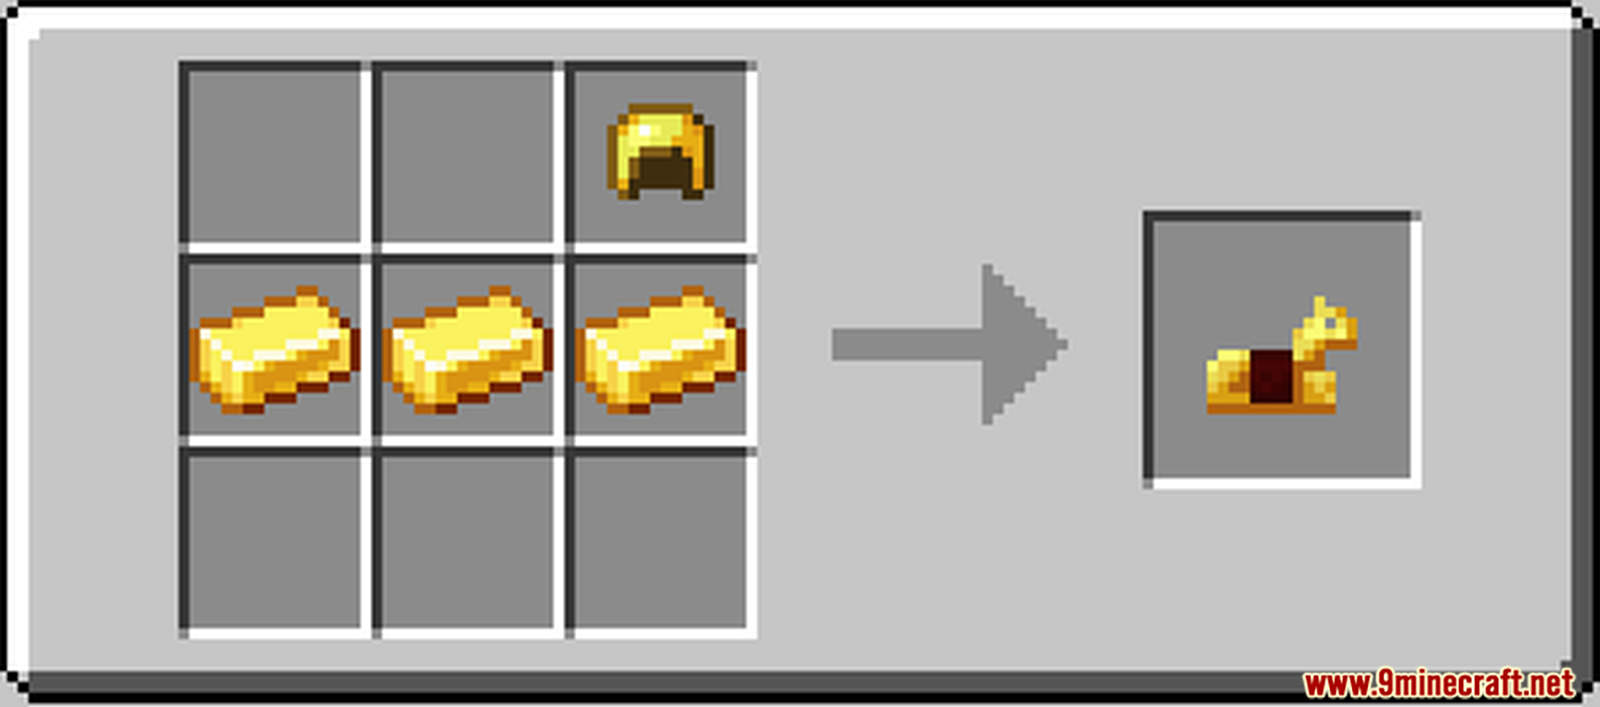 Horse Armor Crafting Data Pack (1.19.3, 1.18.2) - Craftable Horse Armors 4